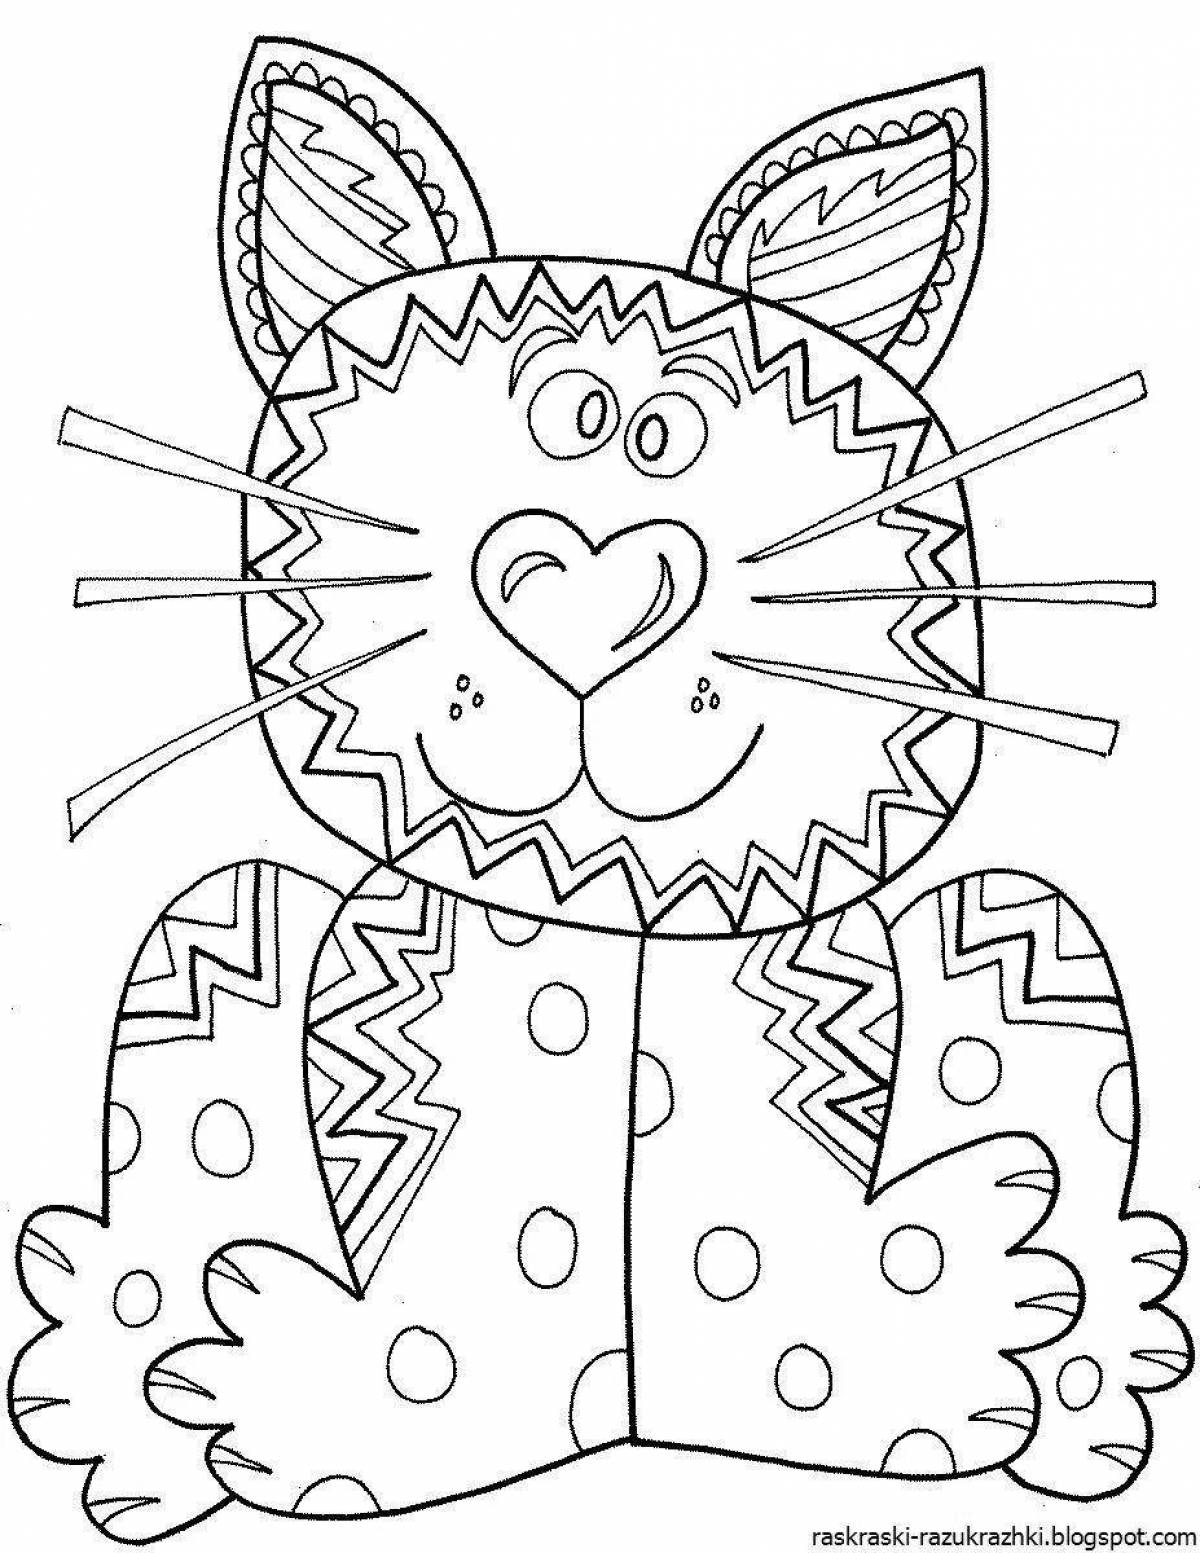 Adorable anti-stress coloring book for 5 year olds